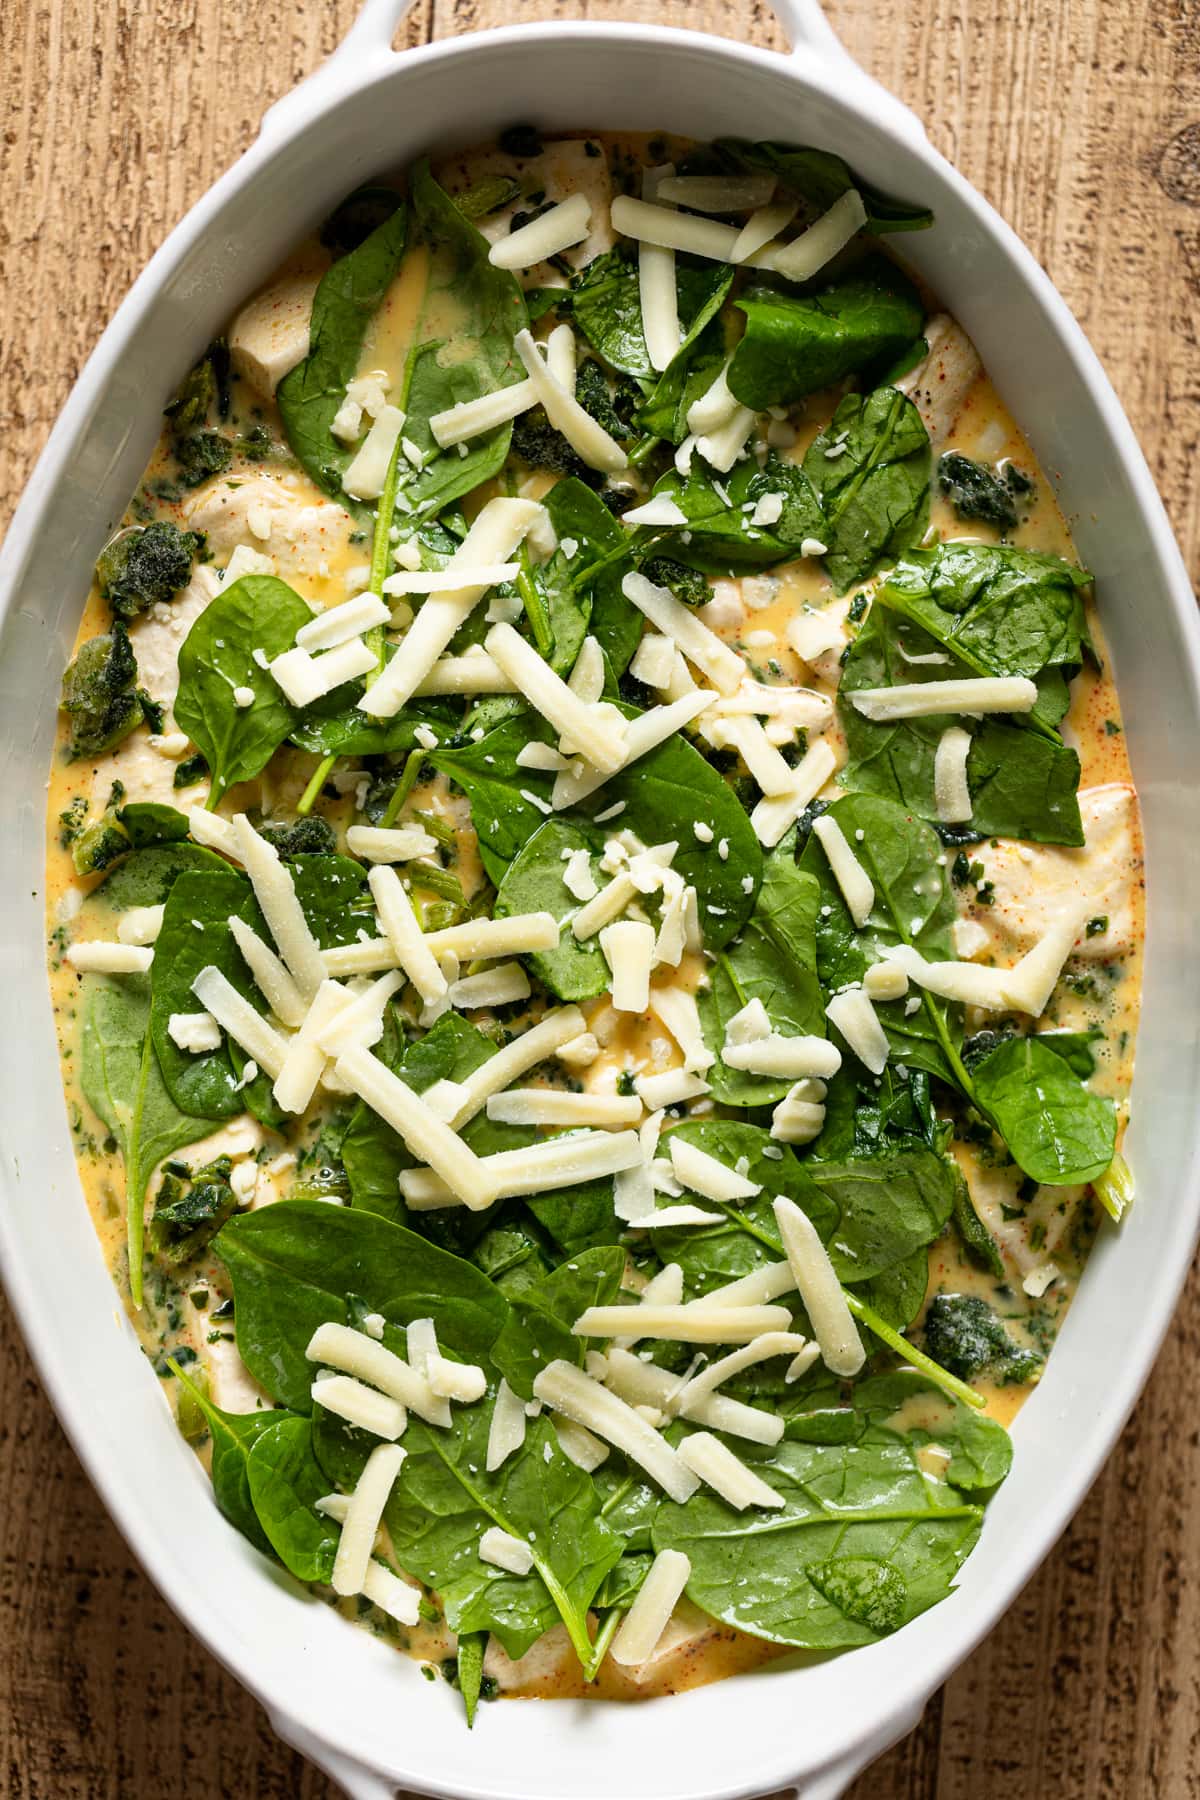 Spinach and shredded cheese on top of the other strata ingredients in a baking dish